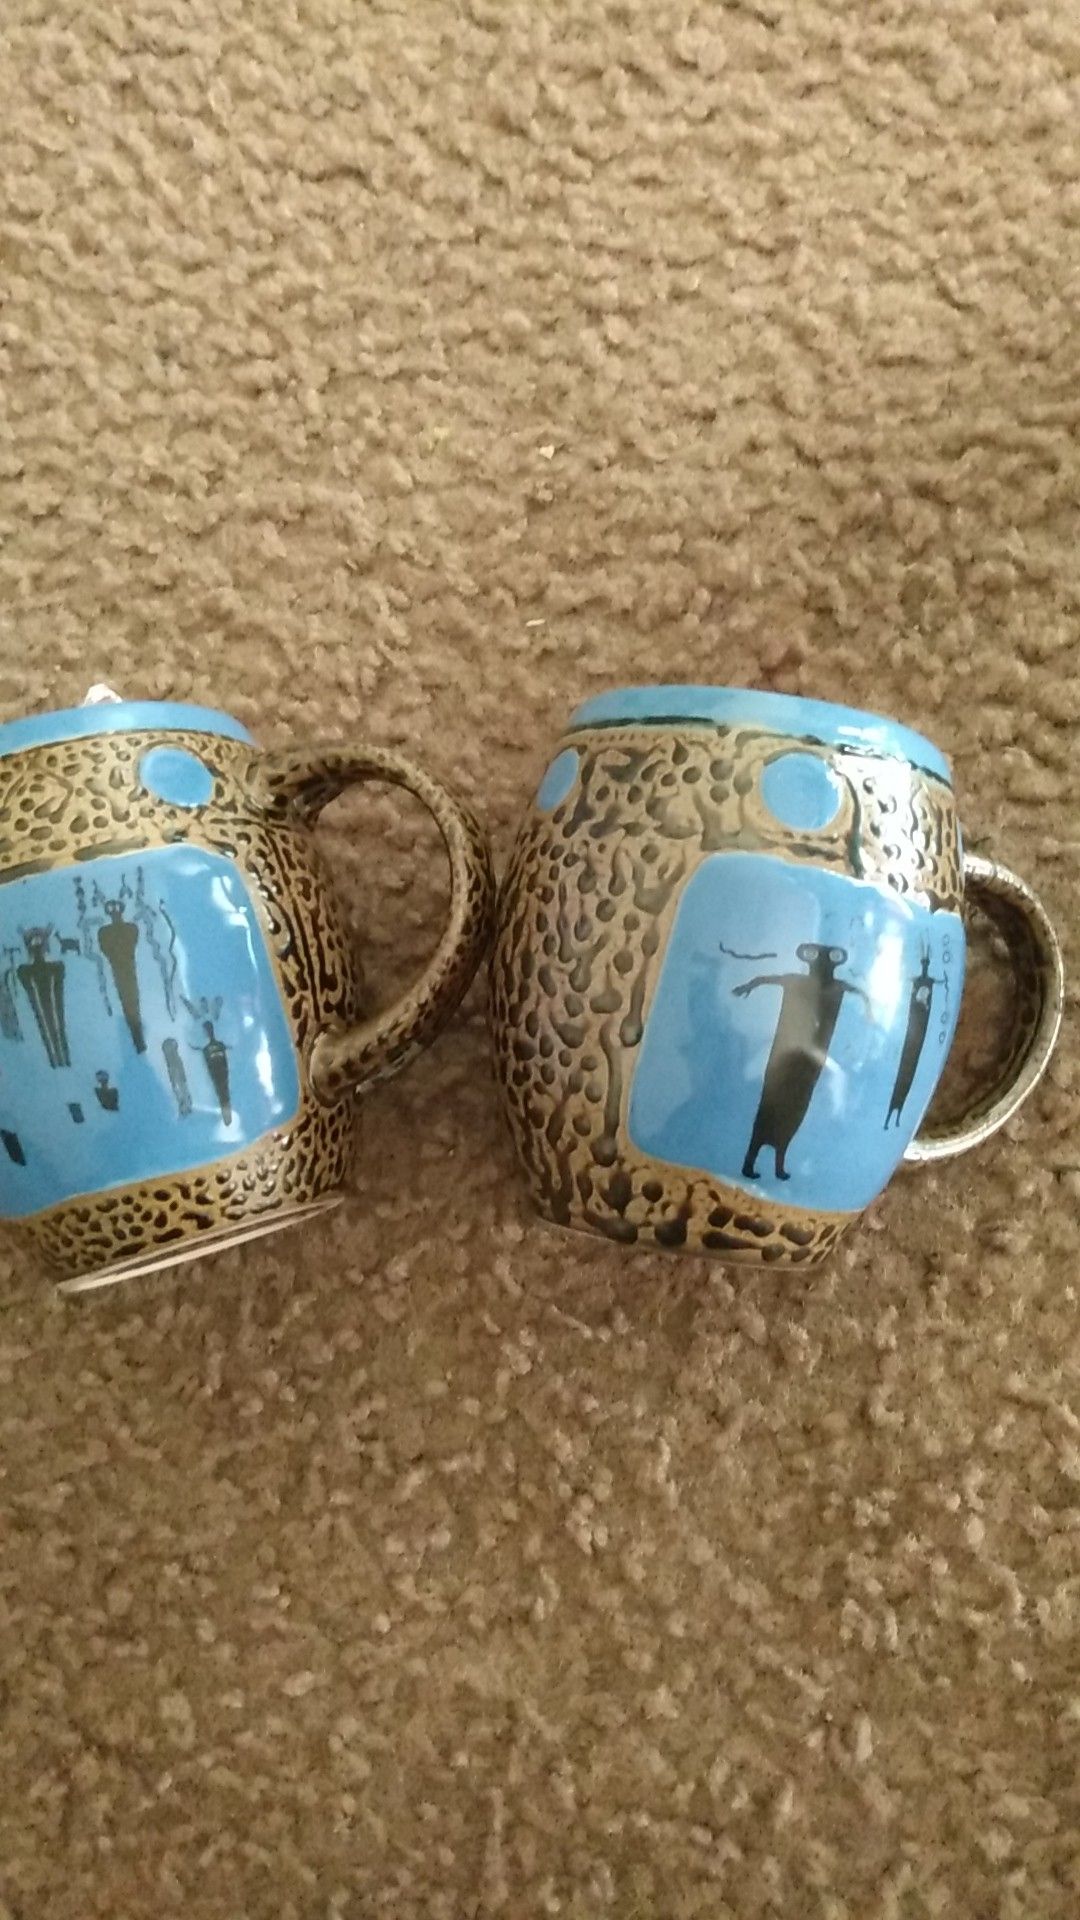 Antique set in great condition Asking $3 for both